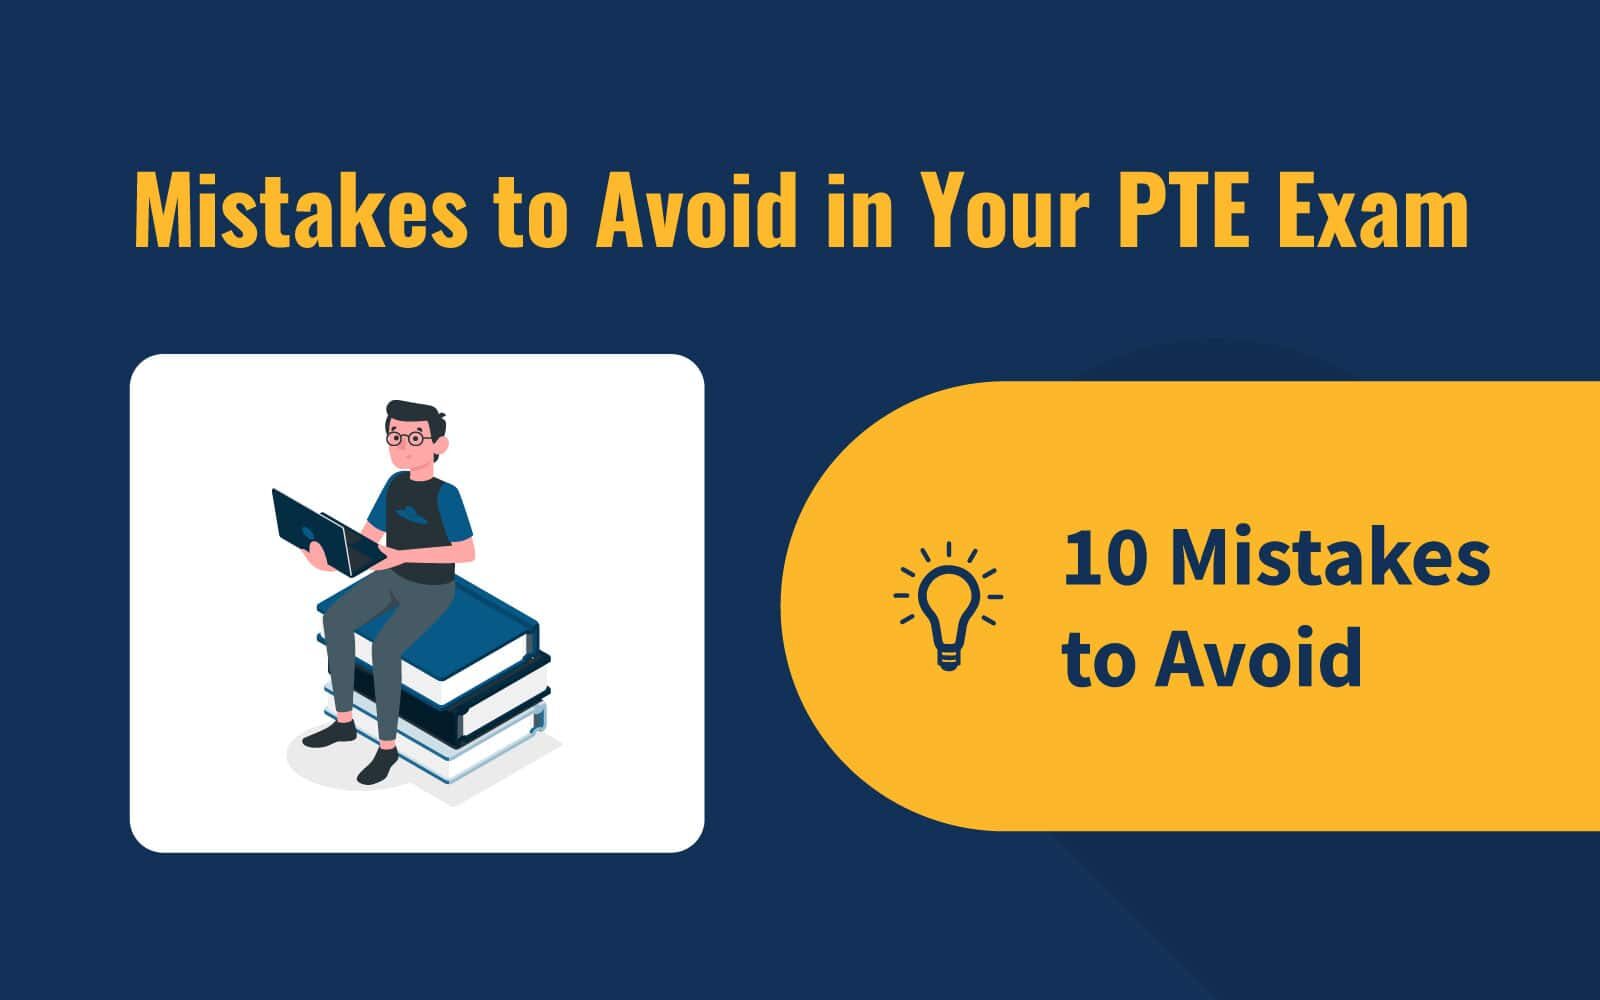 10 Mistakes to Avoid in Your PTE Exam